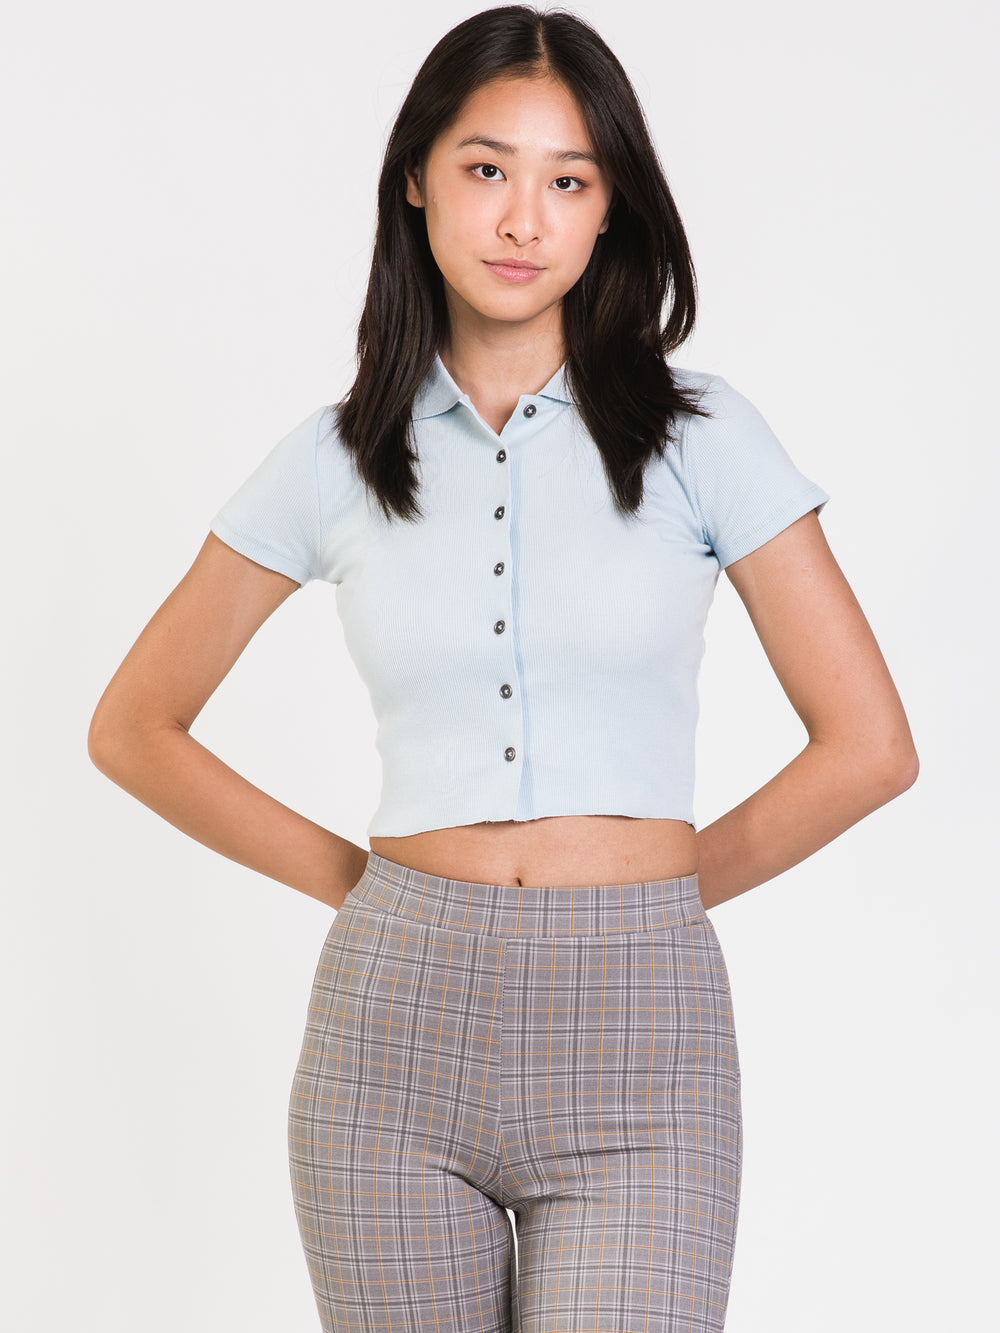 HARLOW NAOMI BUTTON UP - DÉSTOCKAGE